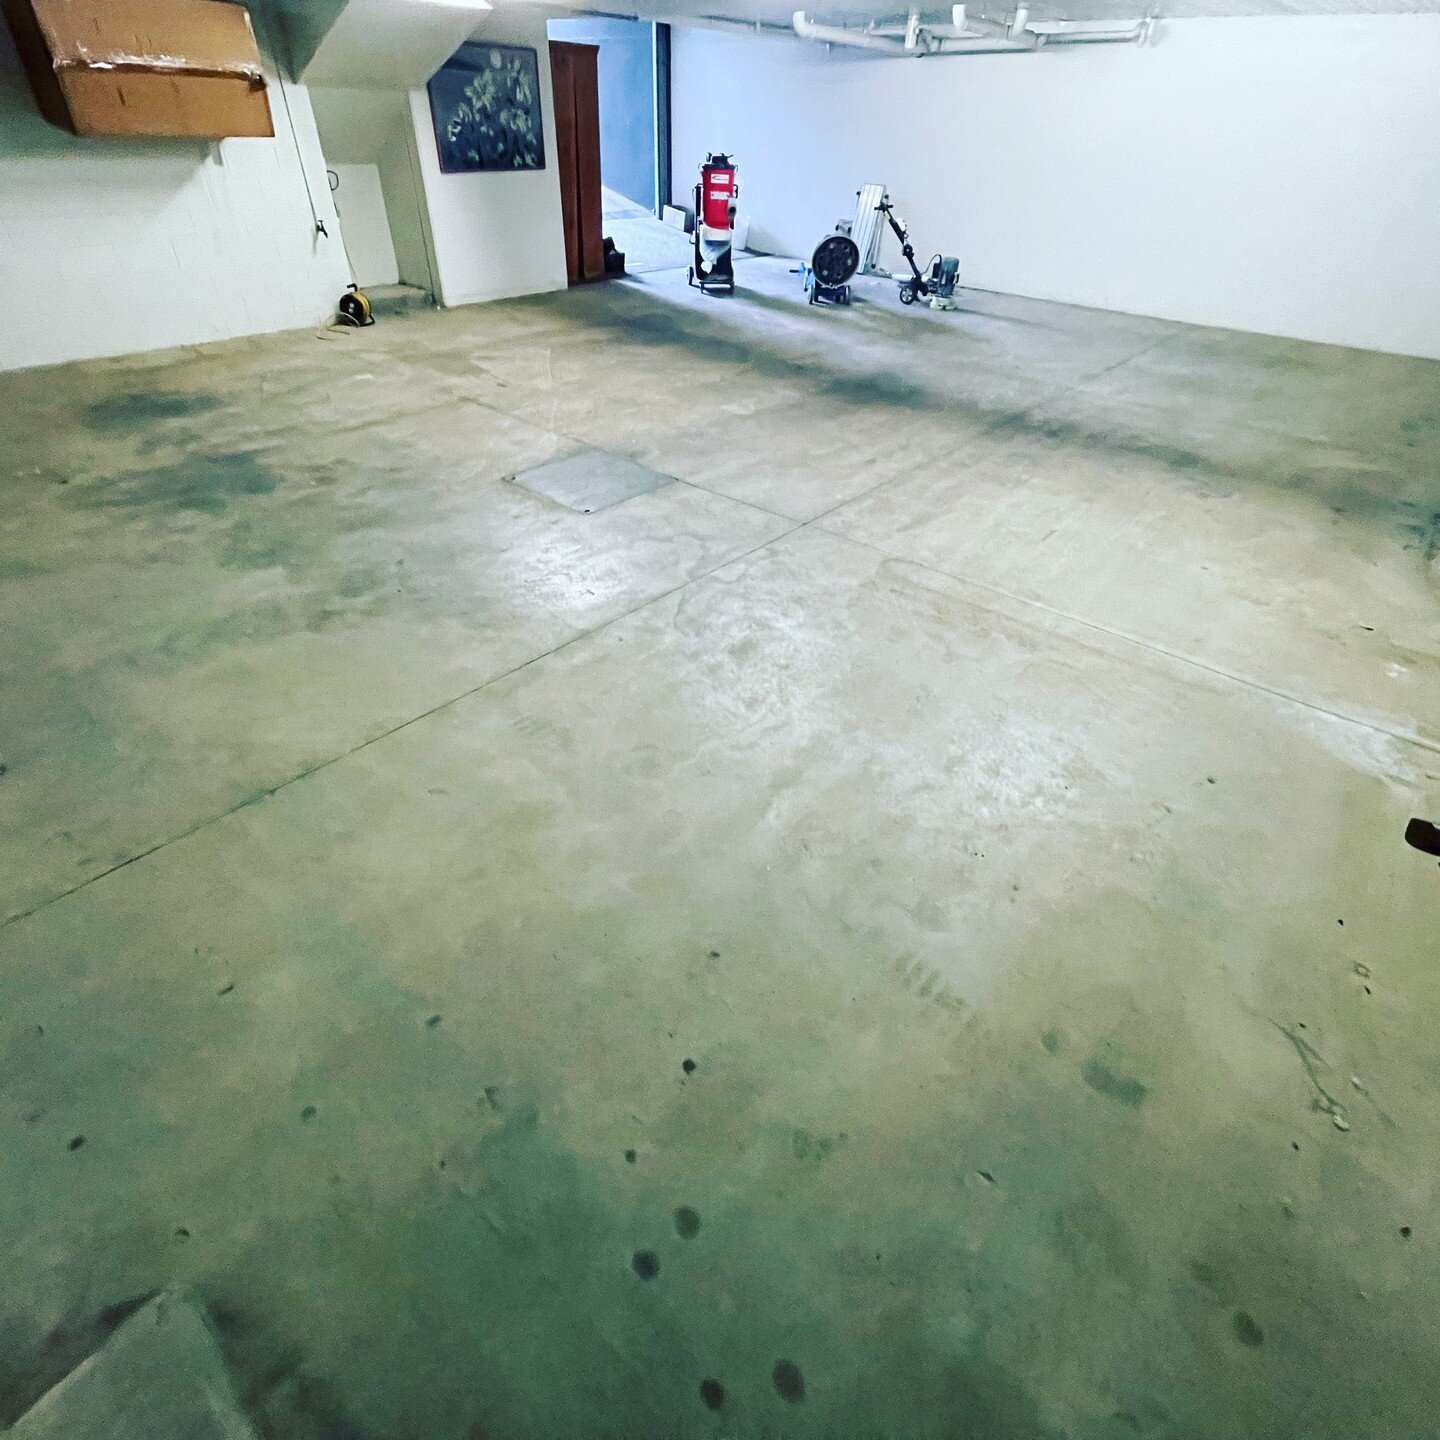 Brighton basement ready for the grind.
100sqm of Ultra Flake epoxy system coming up. Let's go.

#morningtonepoxy #brightonepoxy #epoxy #epoxyflooring #epoxyconcrete #epoxyresurfacing #concreteresurfacing #concreterestoration